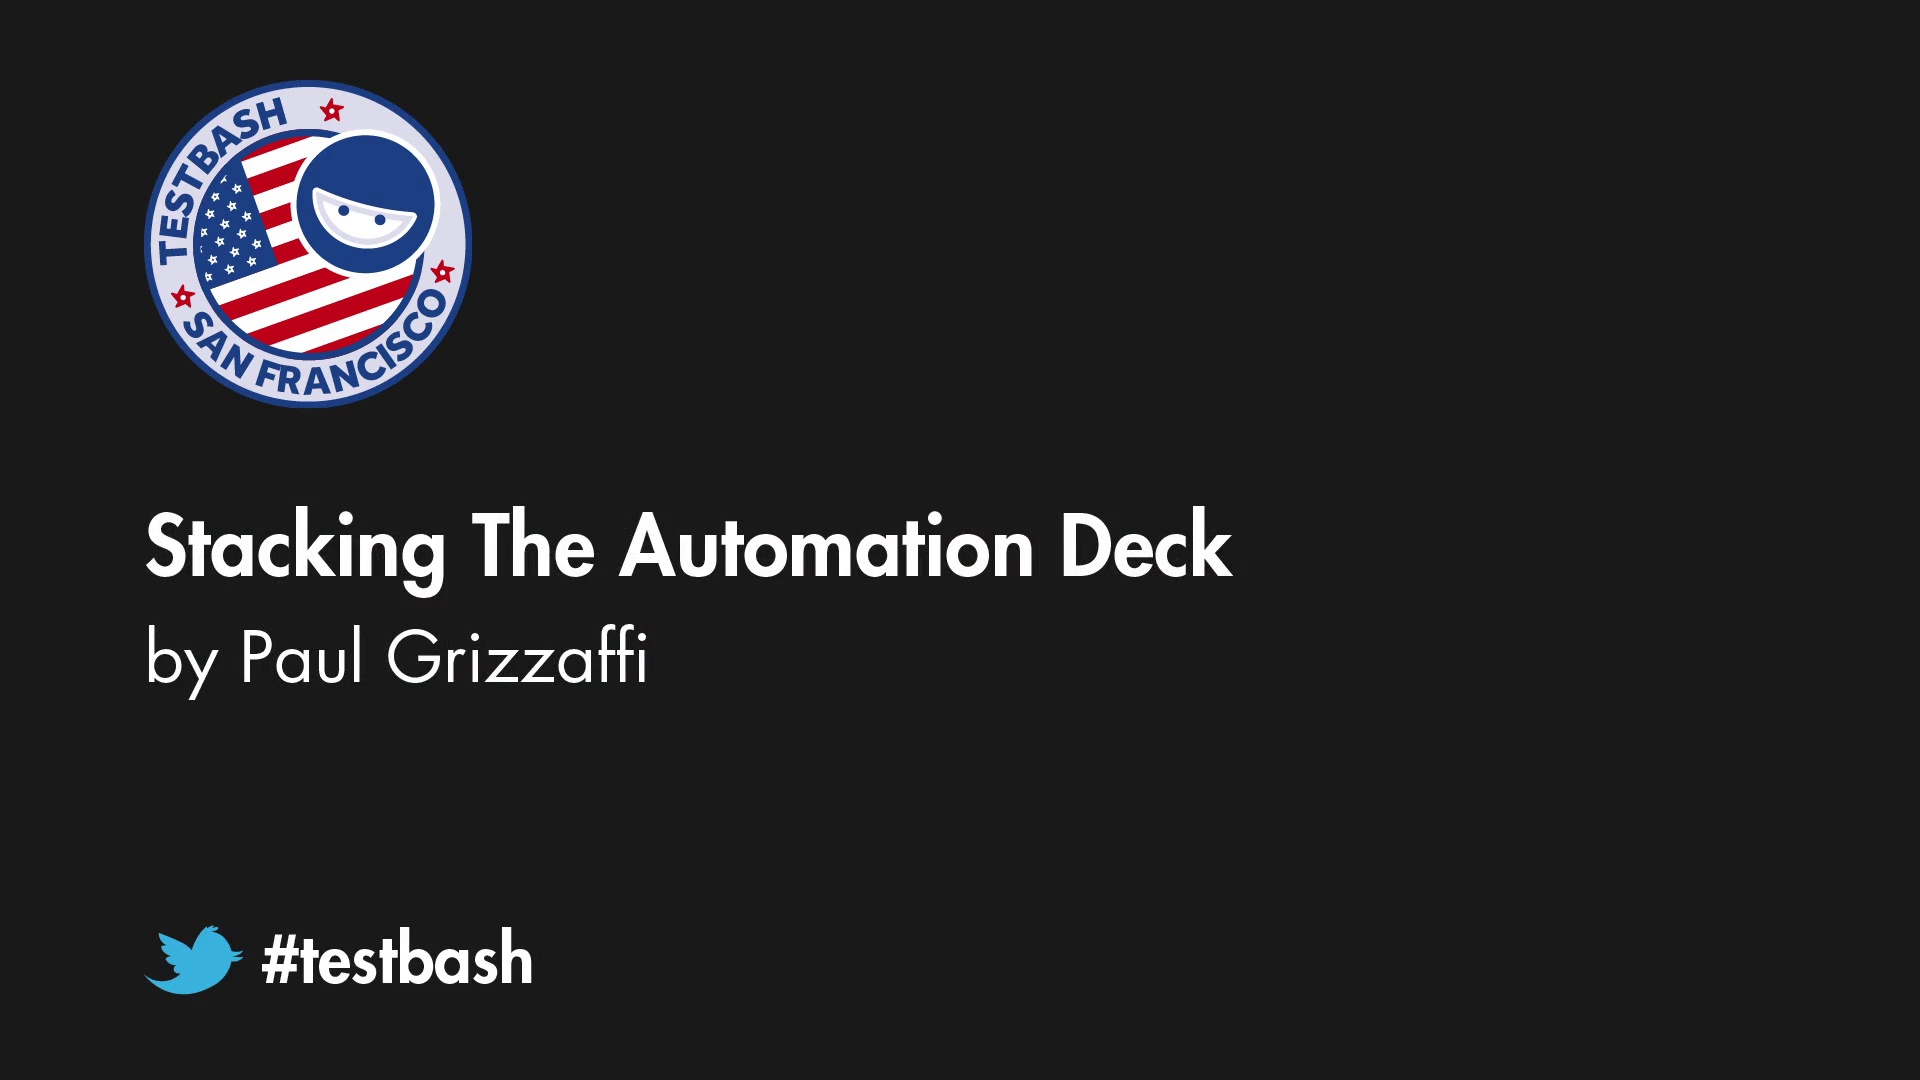 Stacking The Automation Deck - Paul Grizzafi